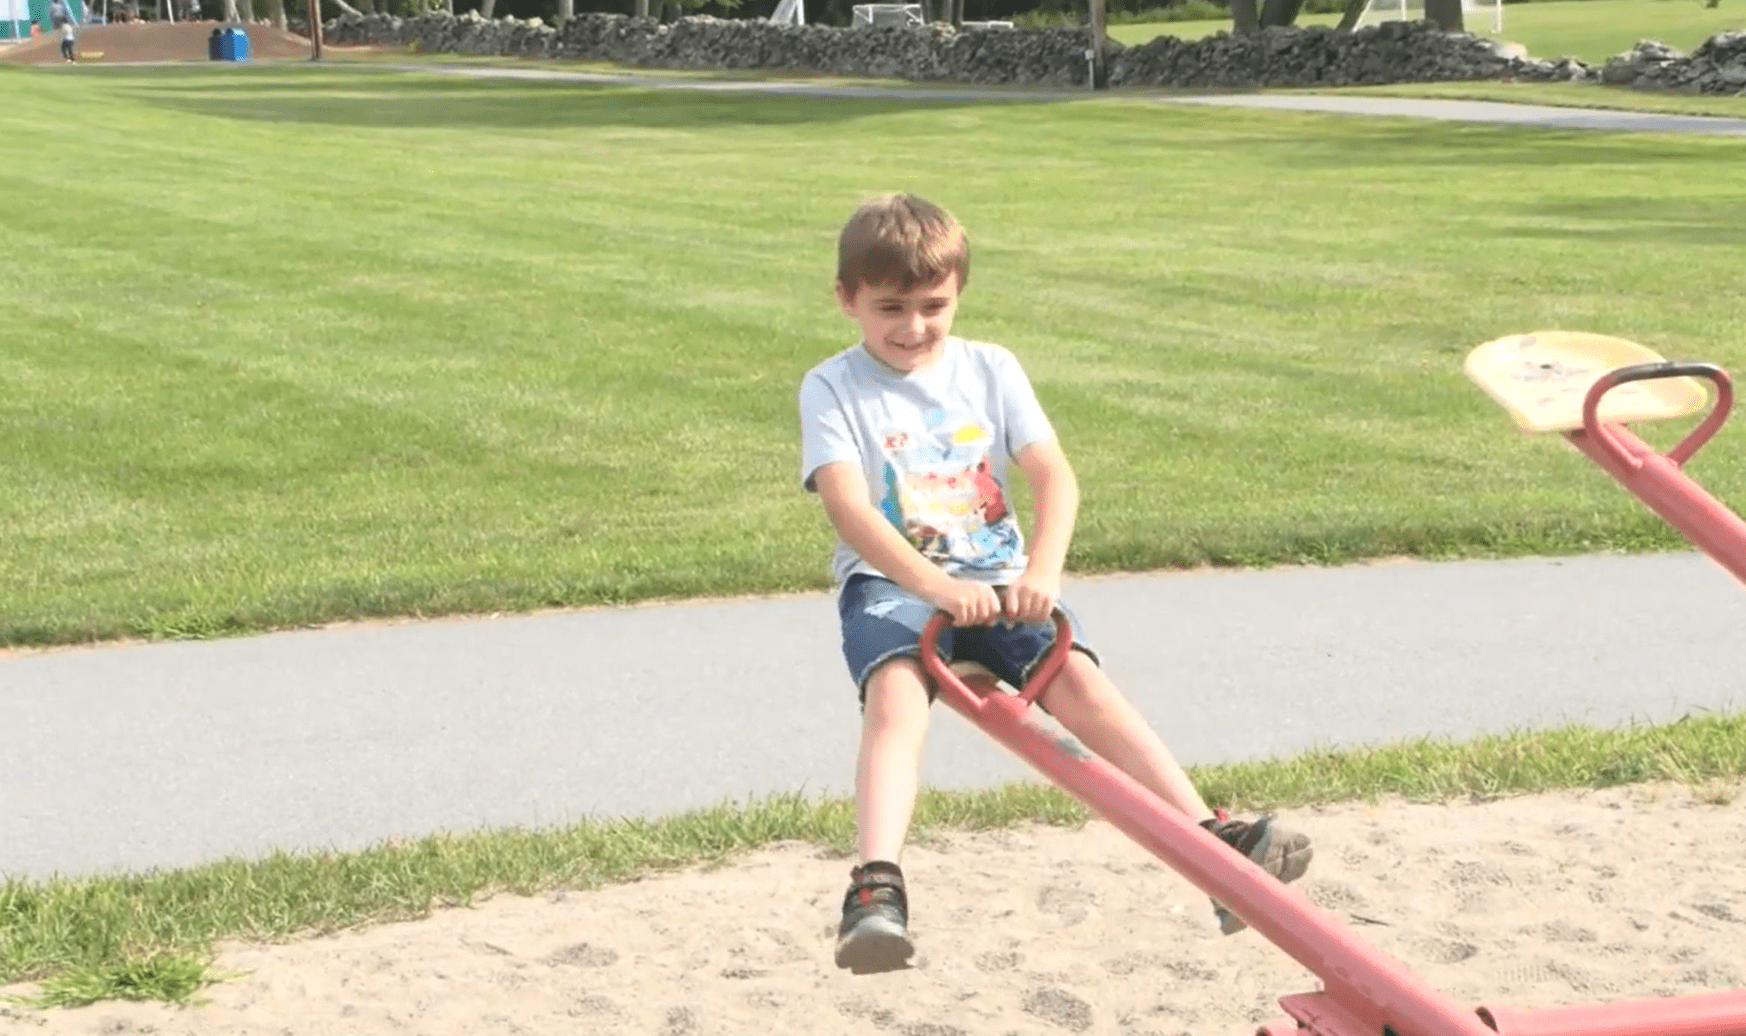 7-year-old Rowyn Montgomery on a seesaw. │Source: ABC News 